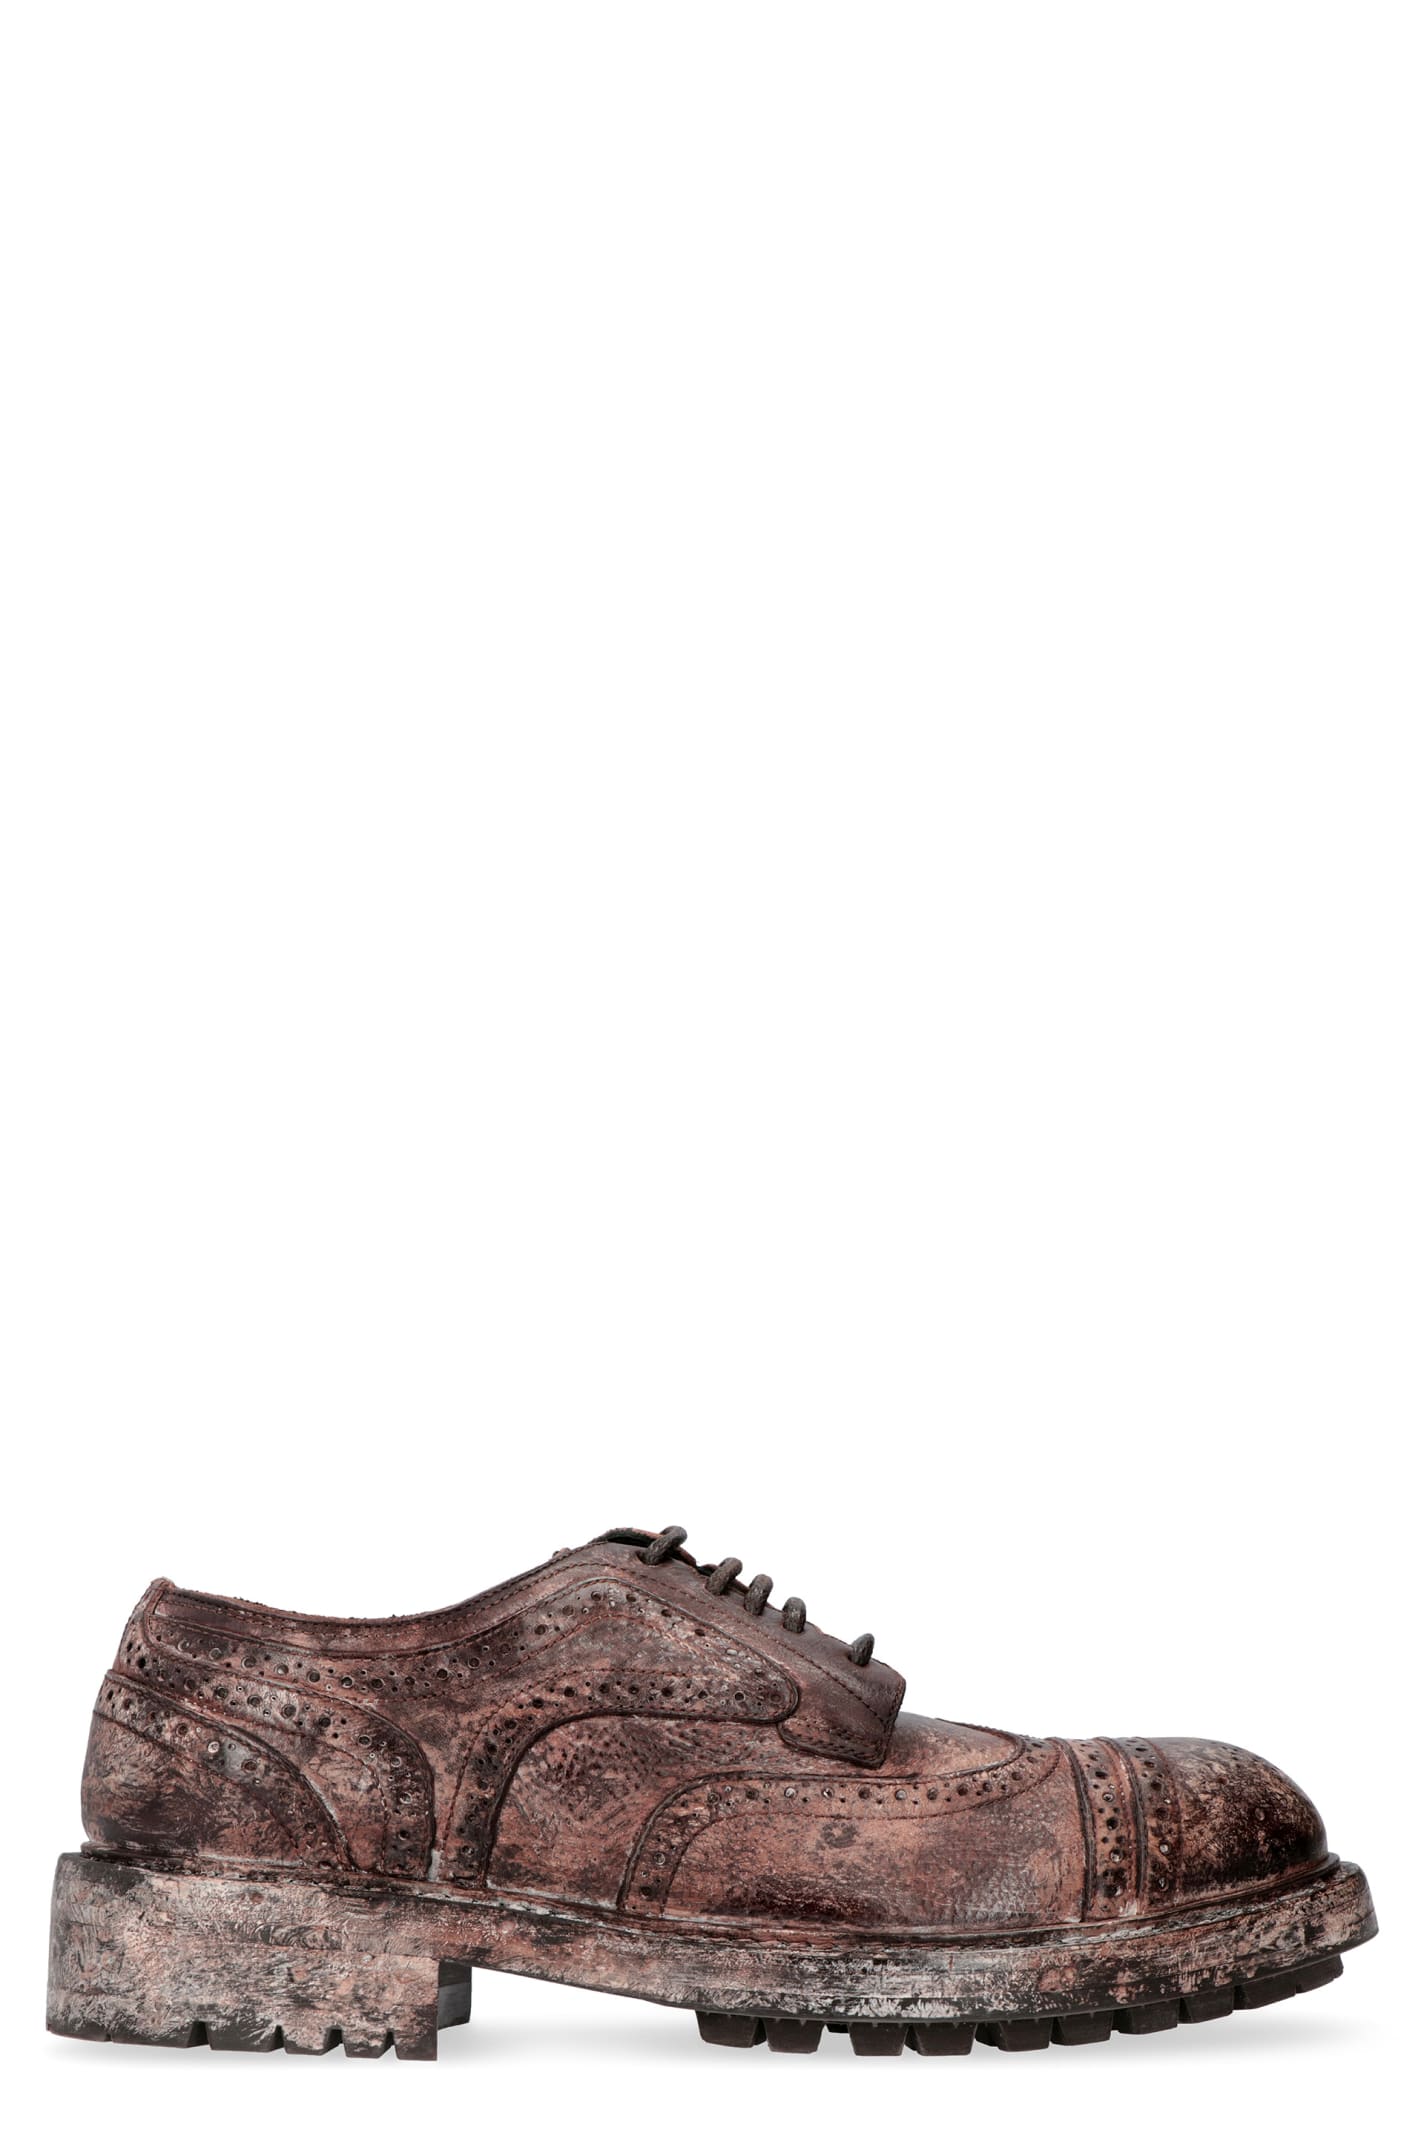 Dolce & Gabbana Leather Brogue Derby Shoes